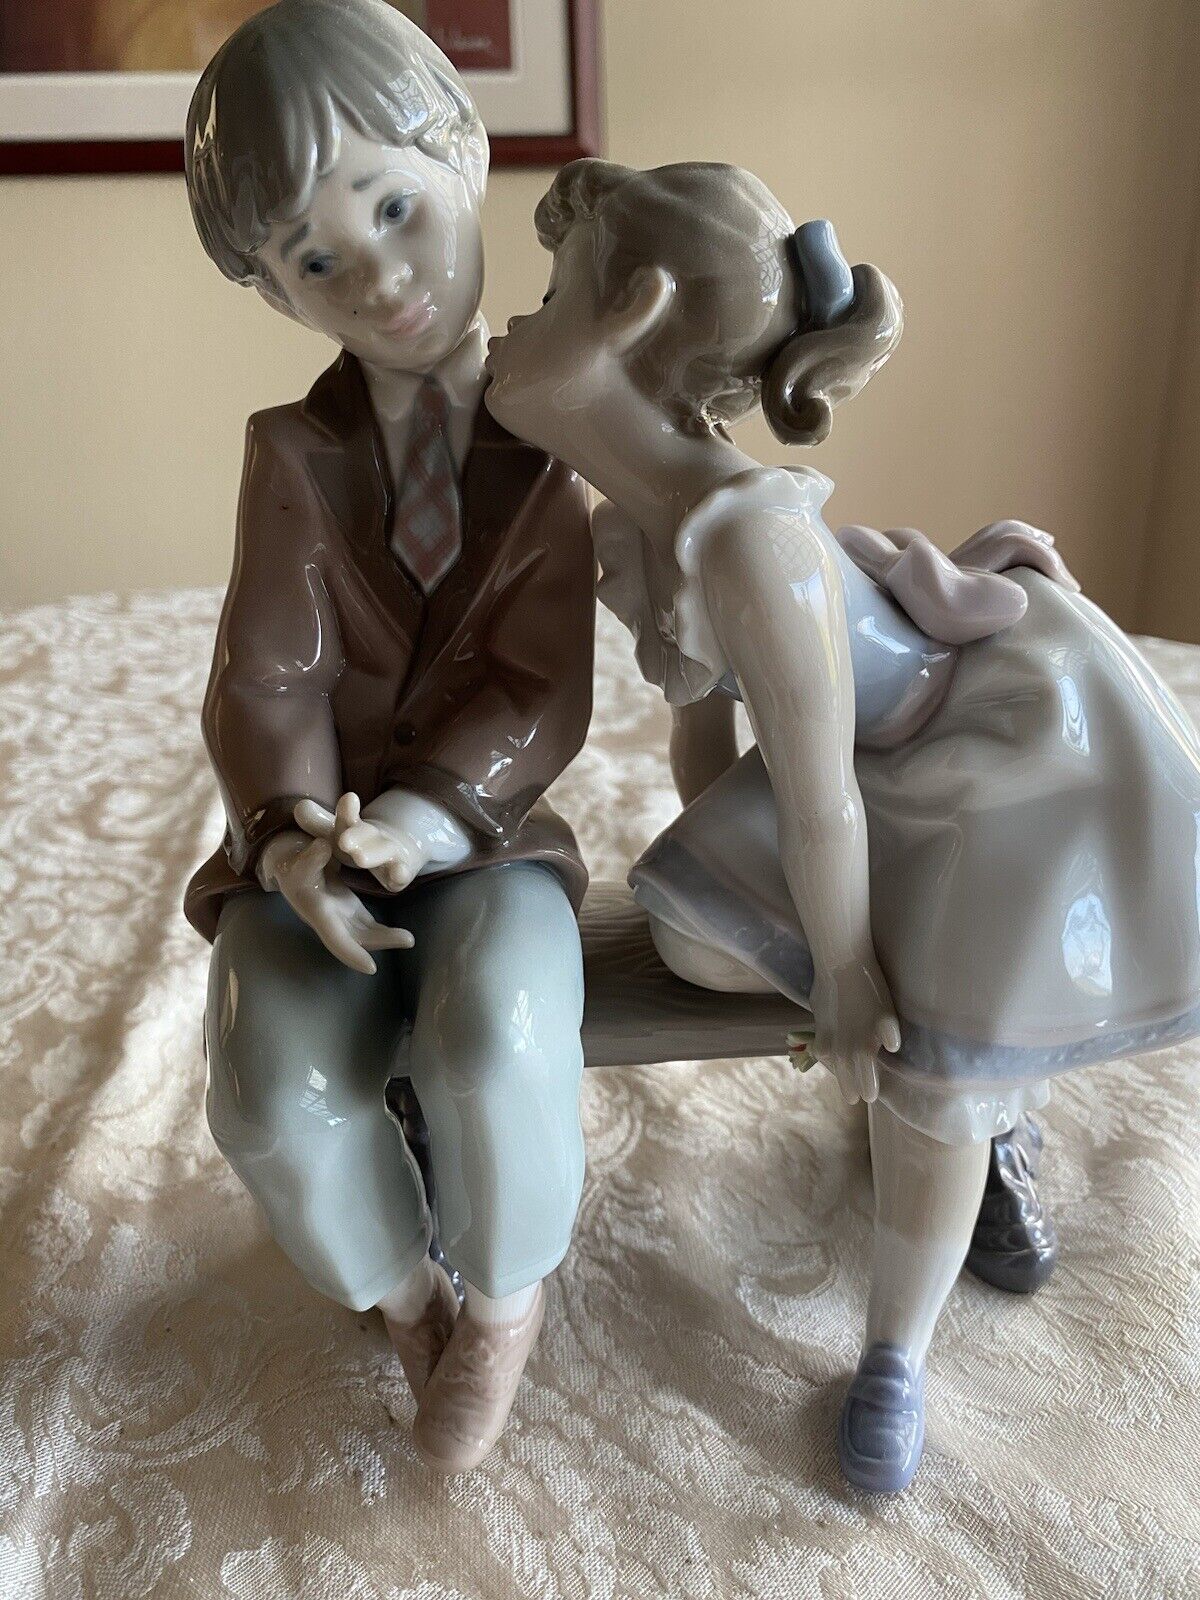 RETIRED 1995 ‘TEN AND GROWING LLADRO’ PORCELAIN FIGURINE- Item#01007635